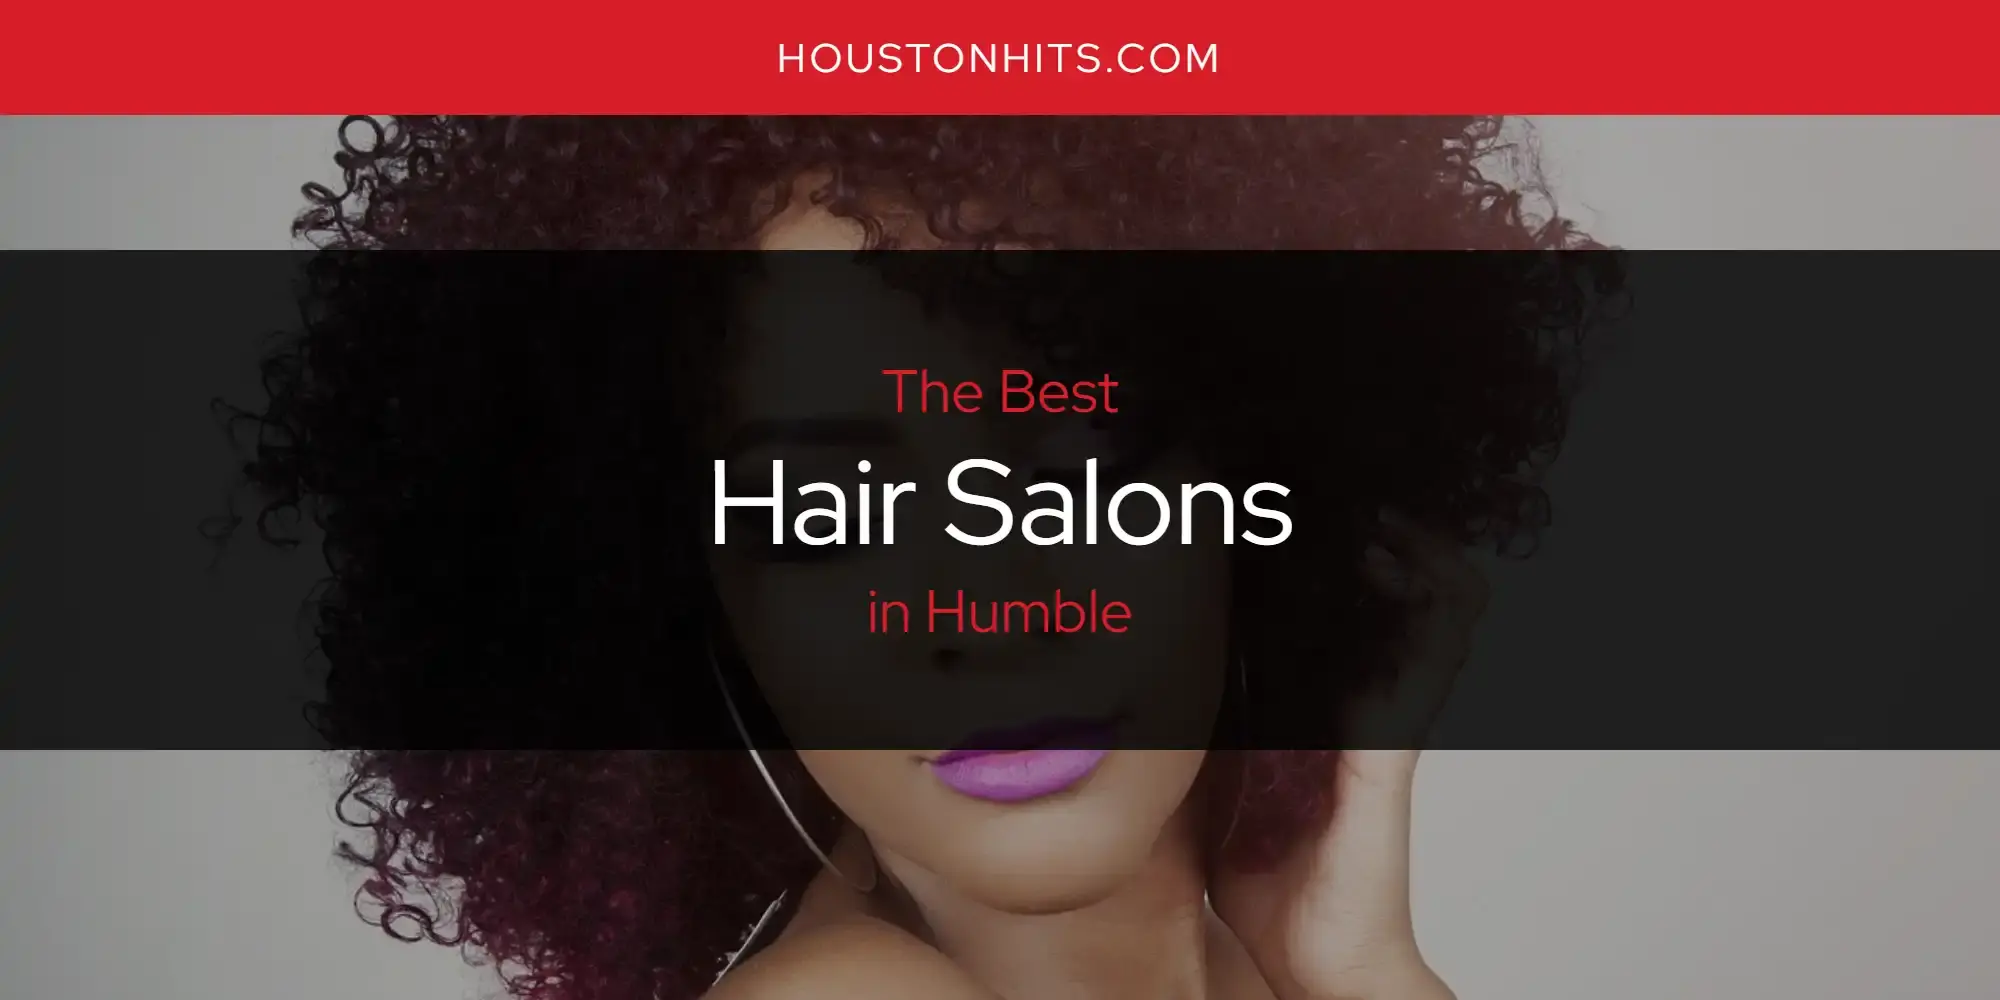 Best Hair Salons in Humble? Here's the Top 17